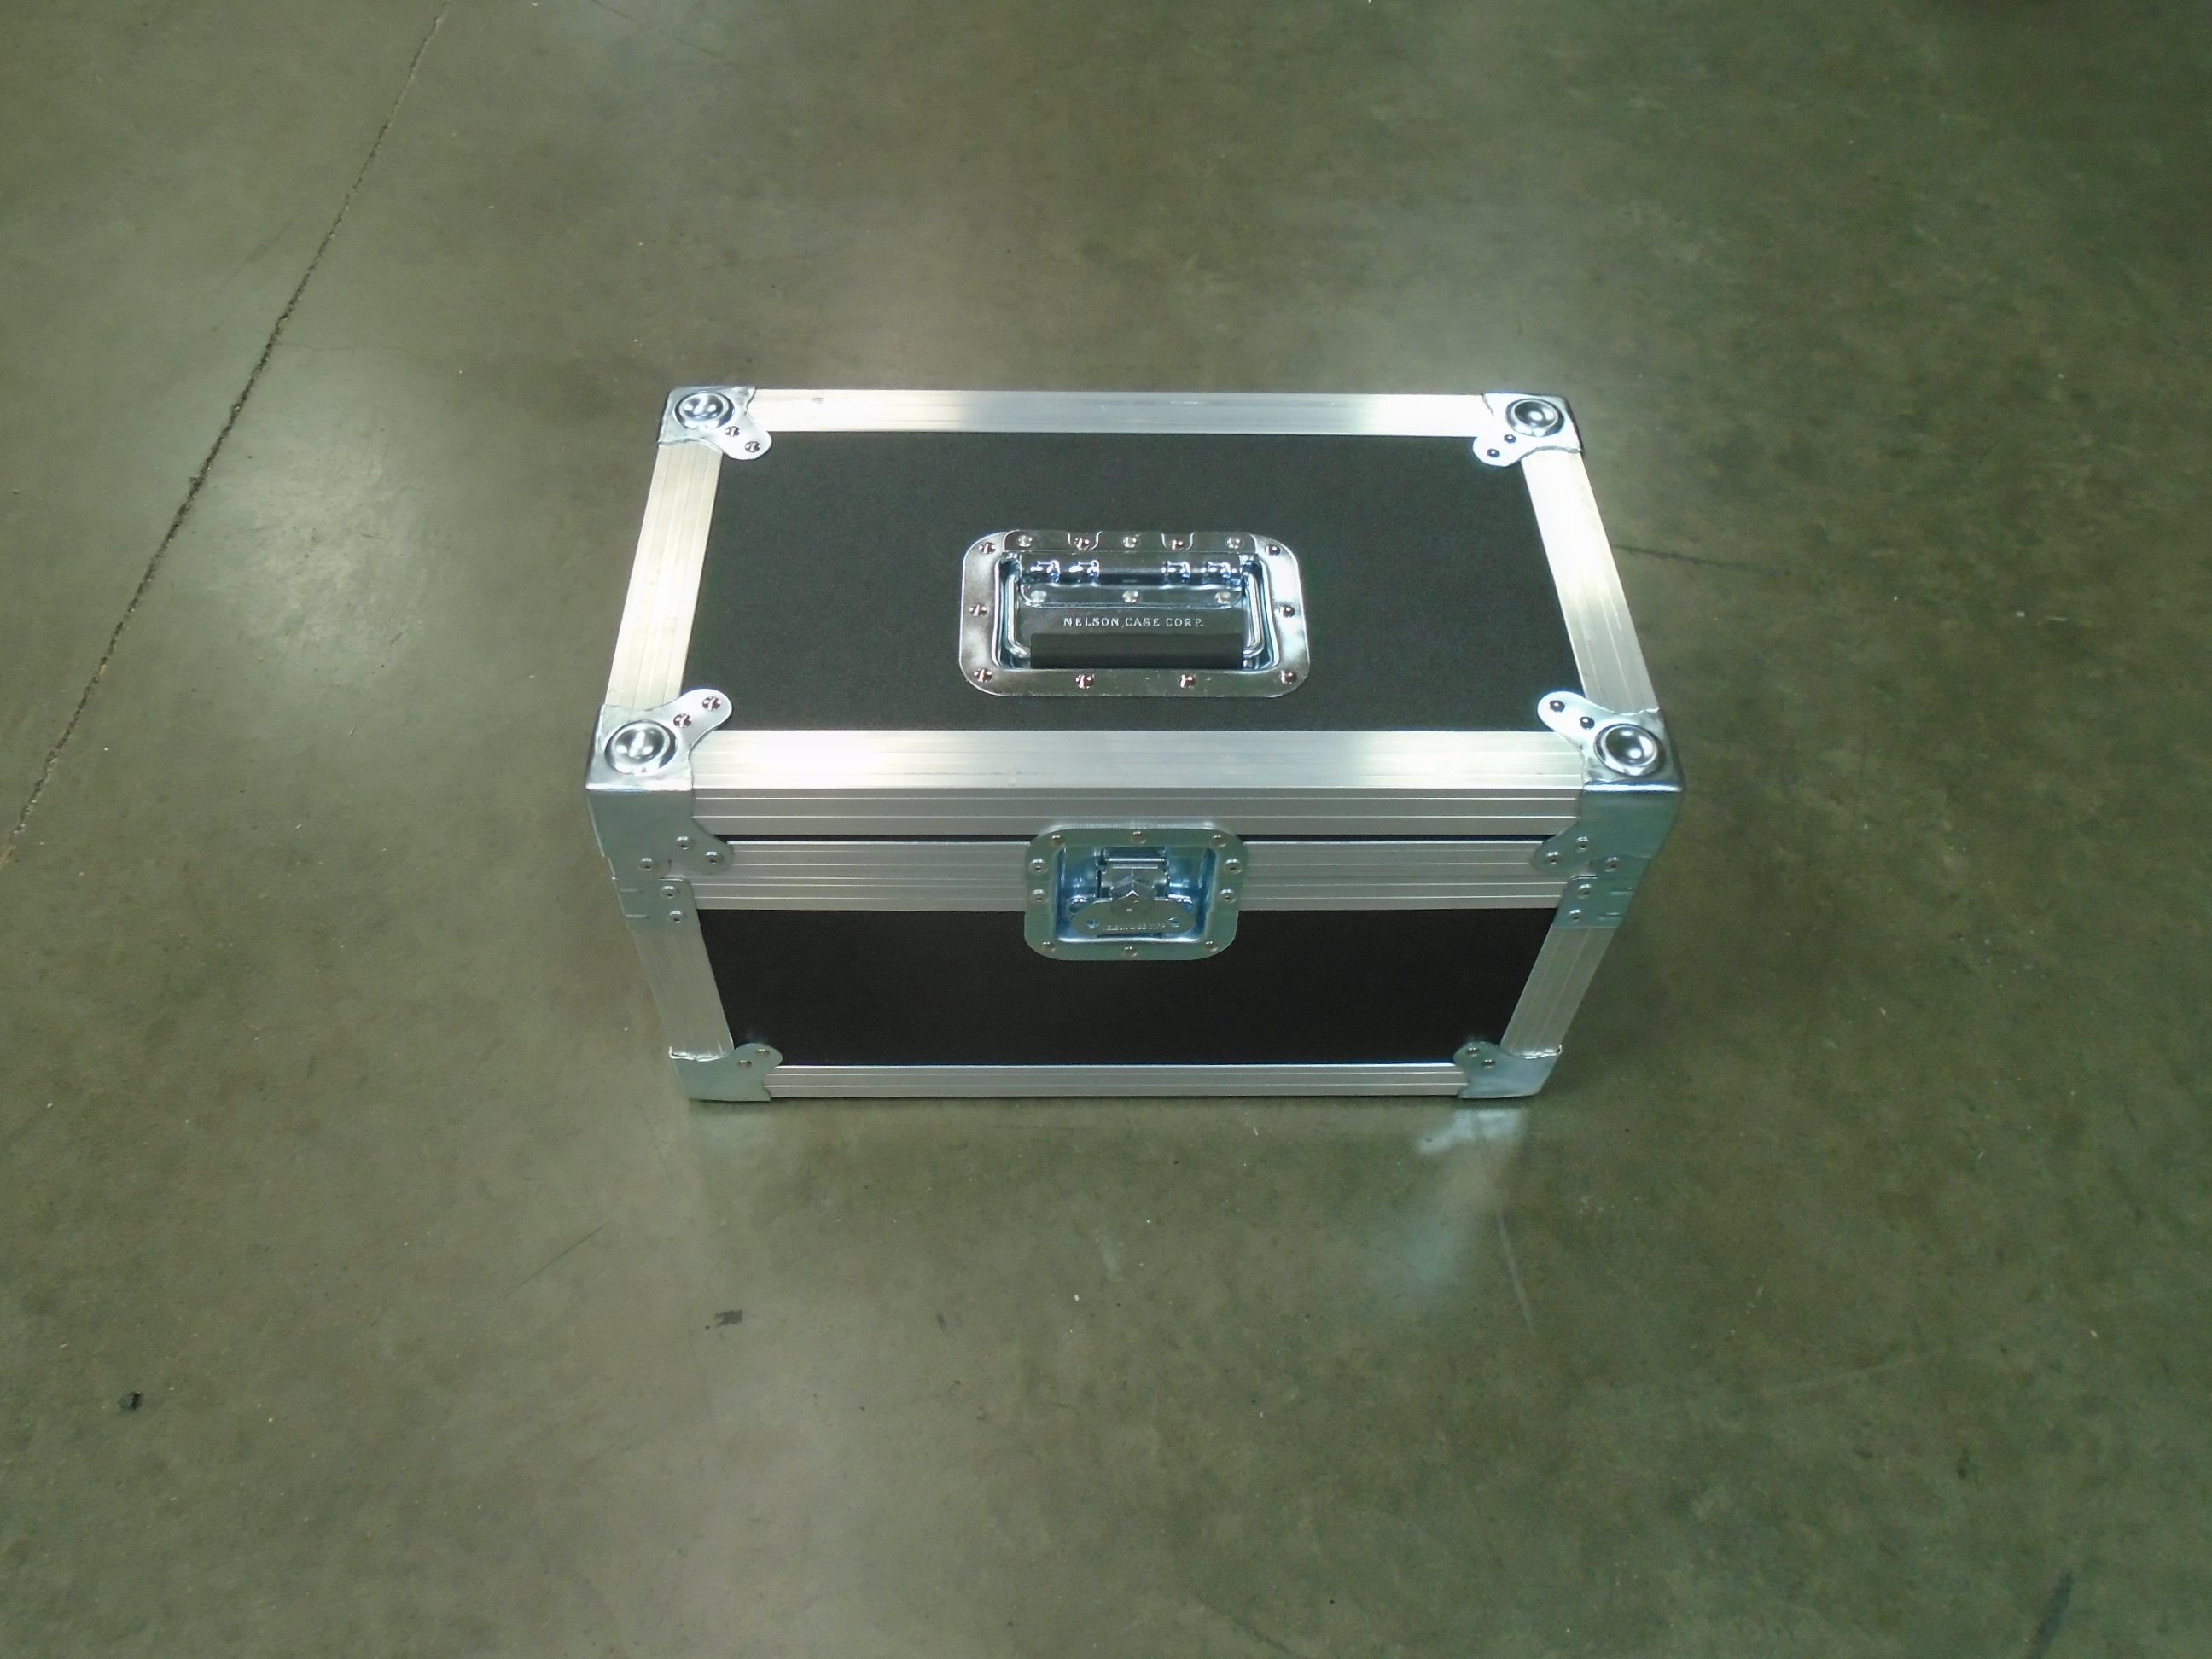 Print # 7309 - Custom Tall Base Road Case for Panasonic ET-D75LE40 Projector Zoom Lens By Nelson Case Corp